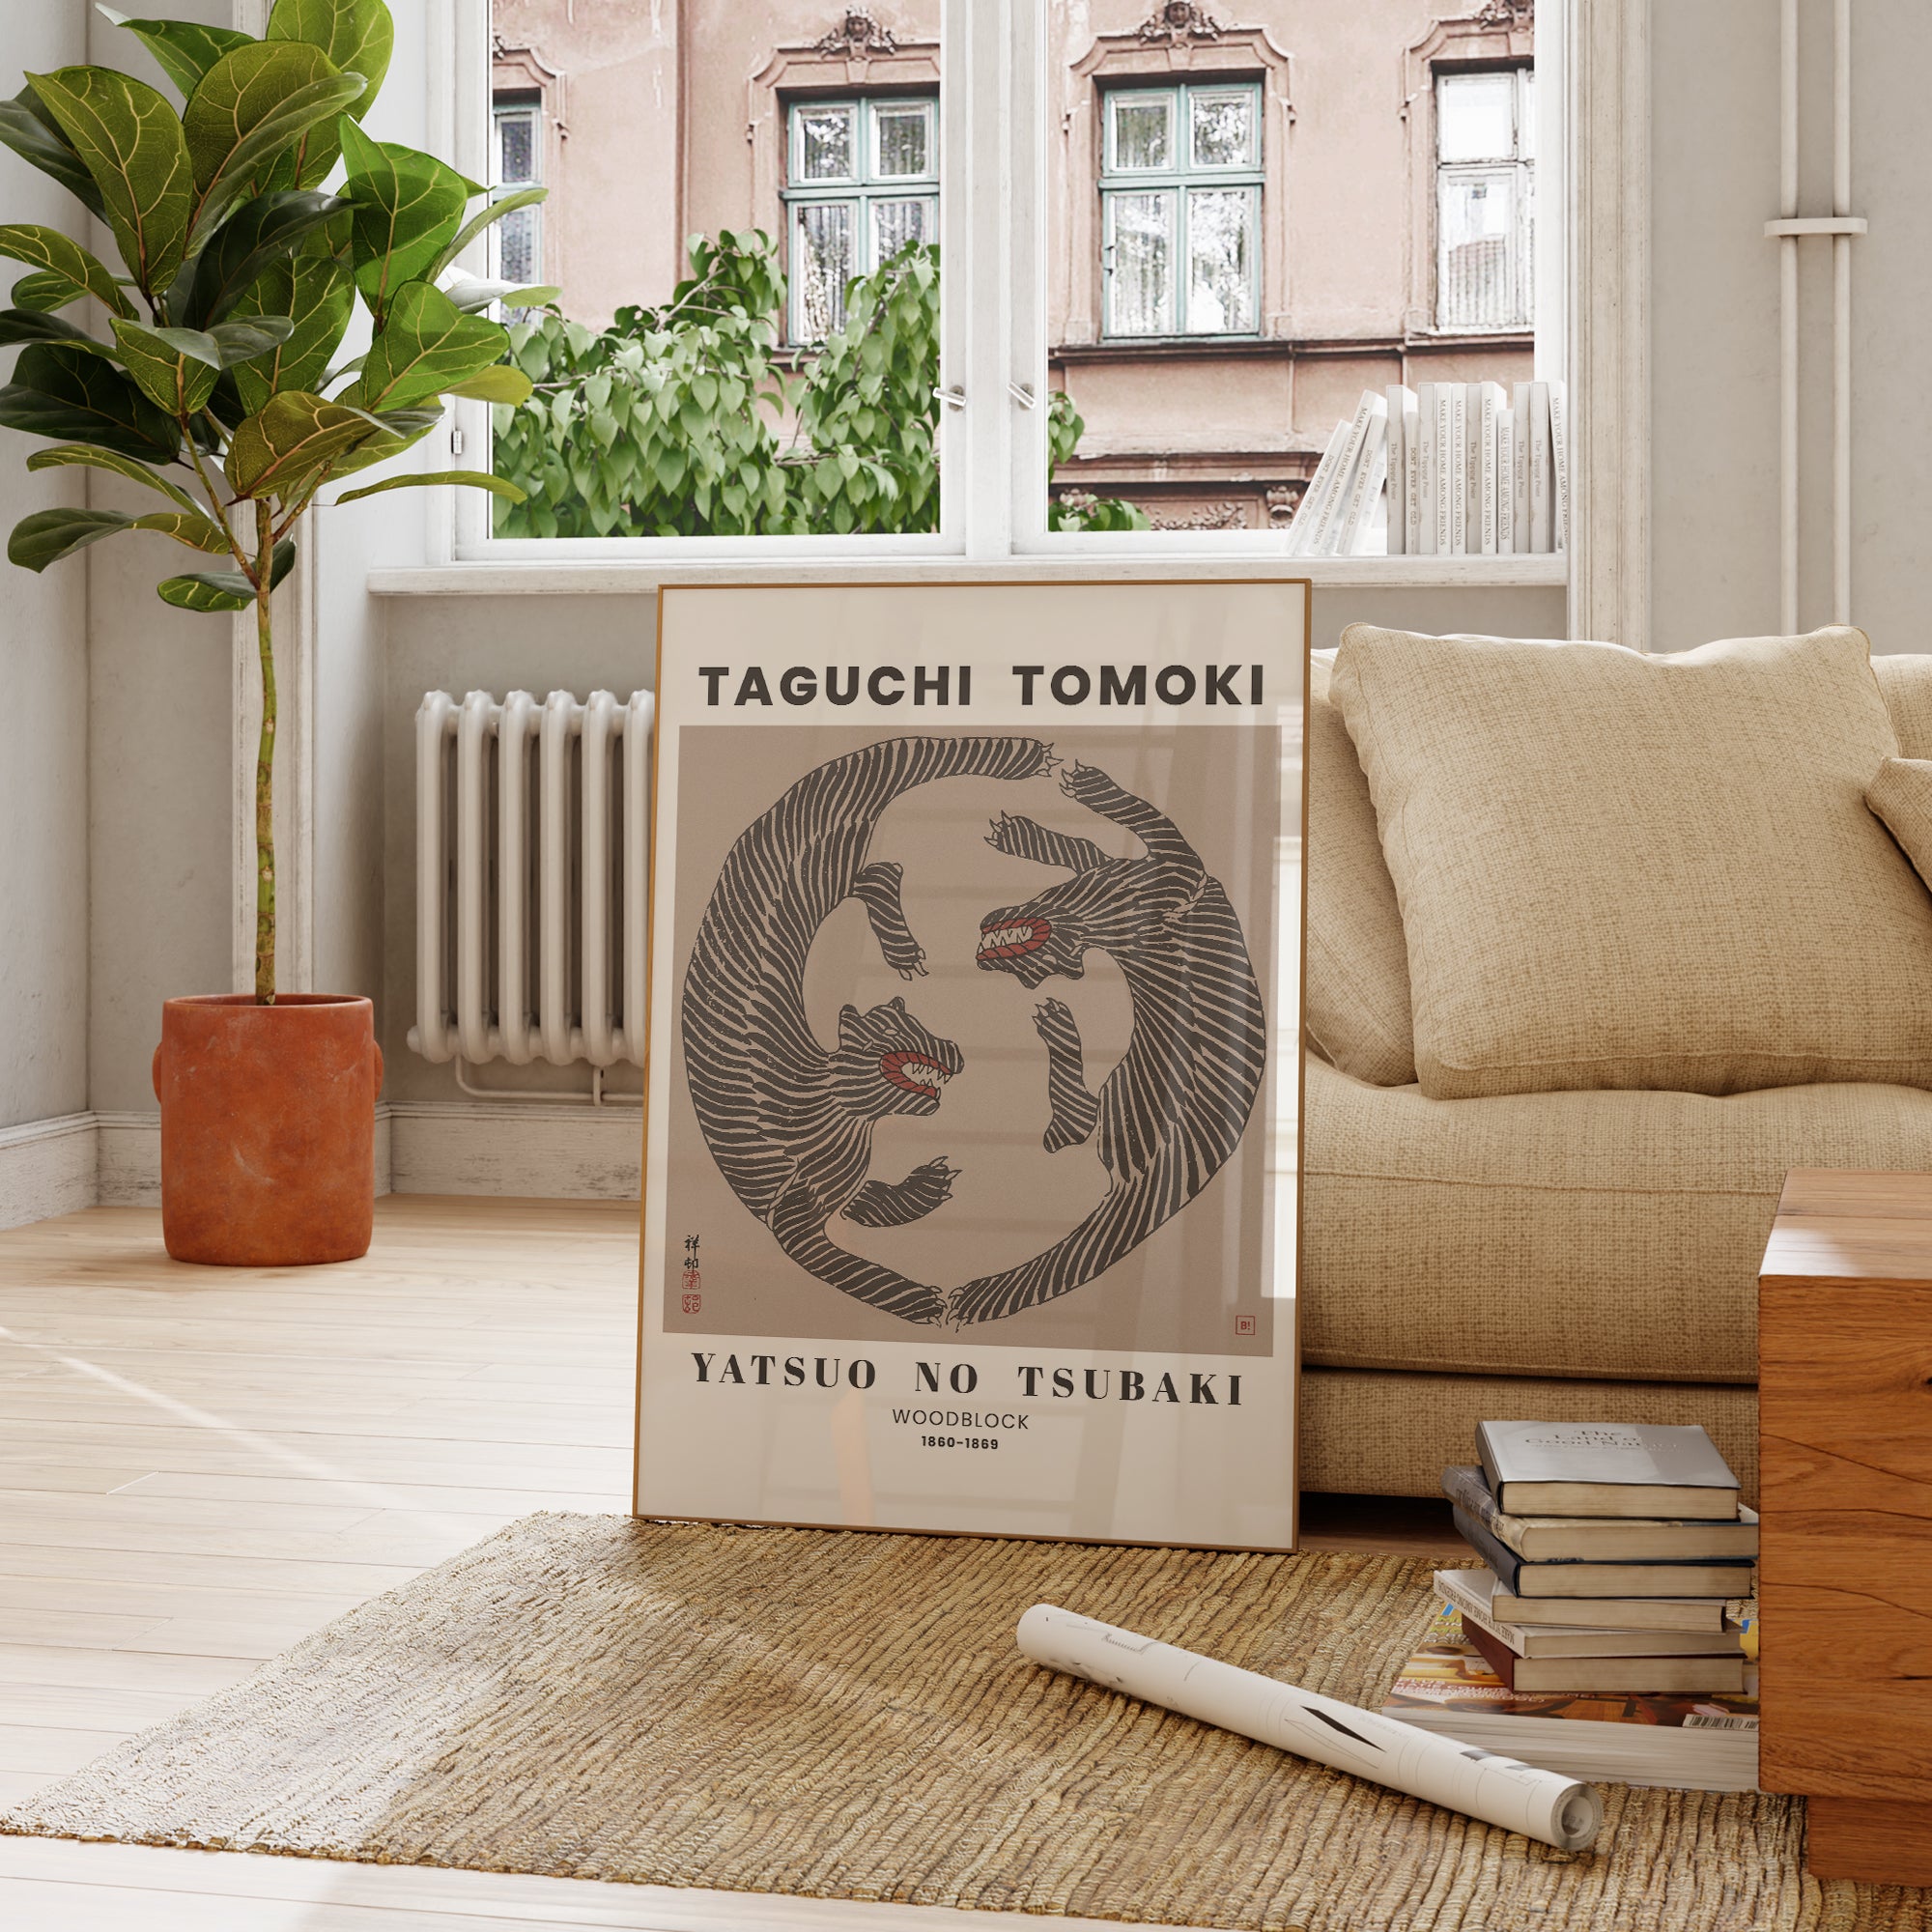 Be inspired by our remastered Taguchi Tomoki Woodblock Tigers Terracotta exhibition art print. This artwork was printed using the giclée process on archival acid-free paper and is presented in a french living room that captures its timeless beauty in every detail.